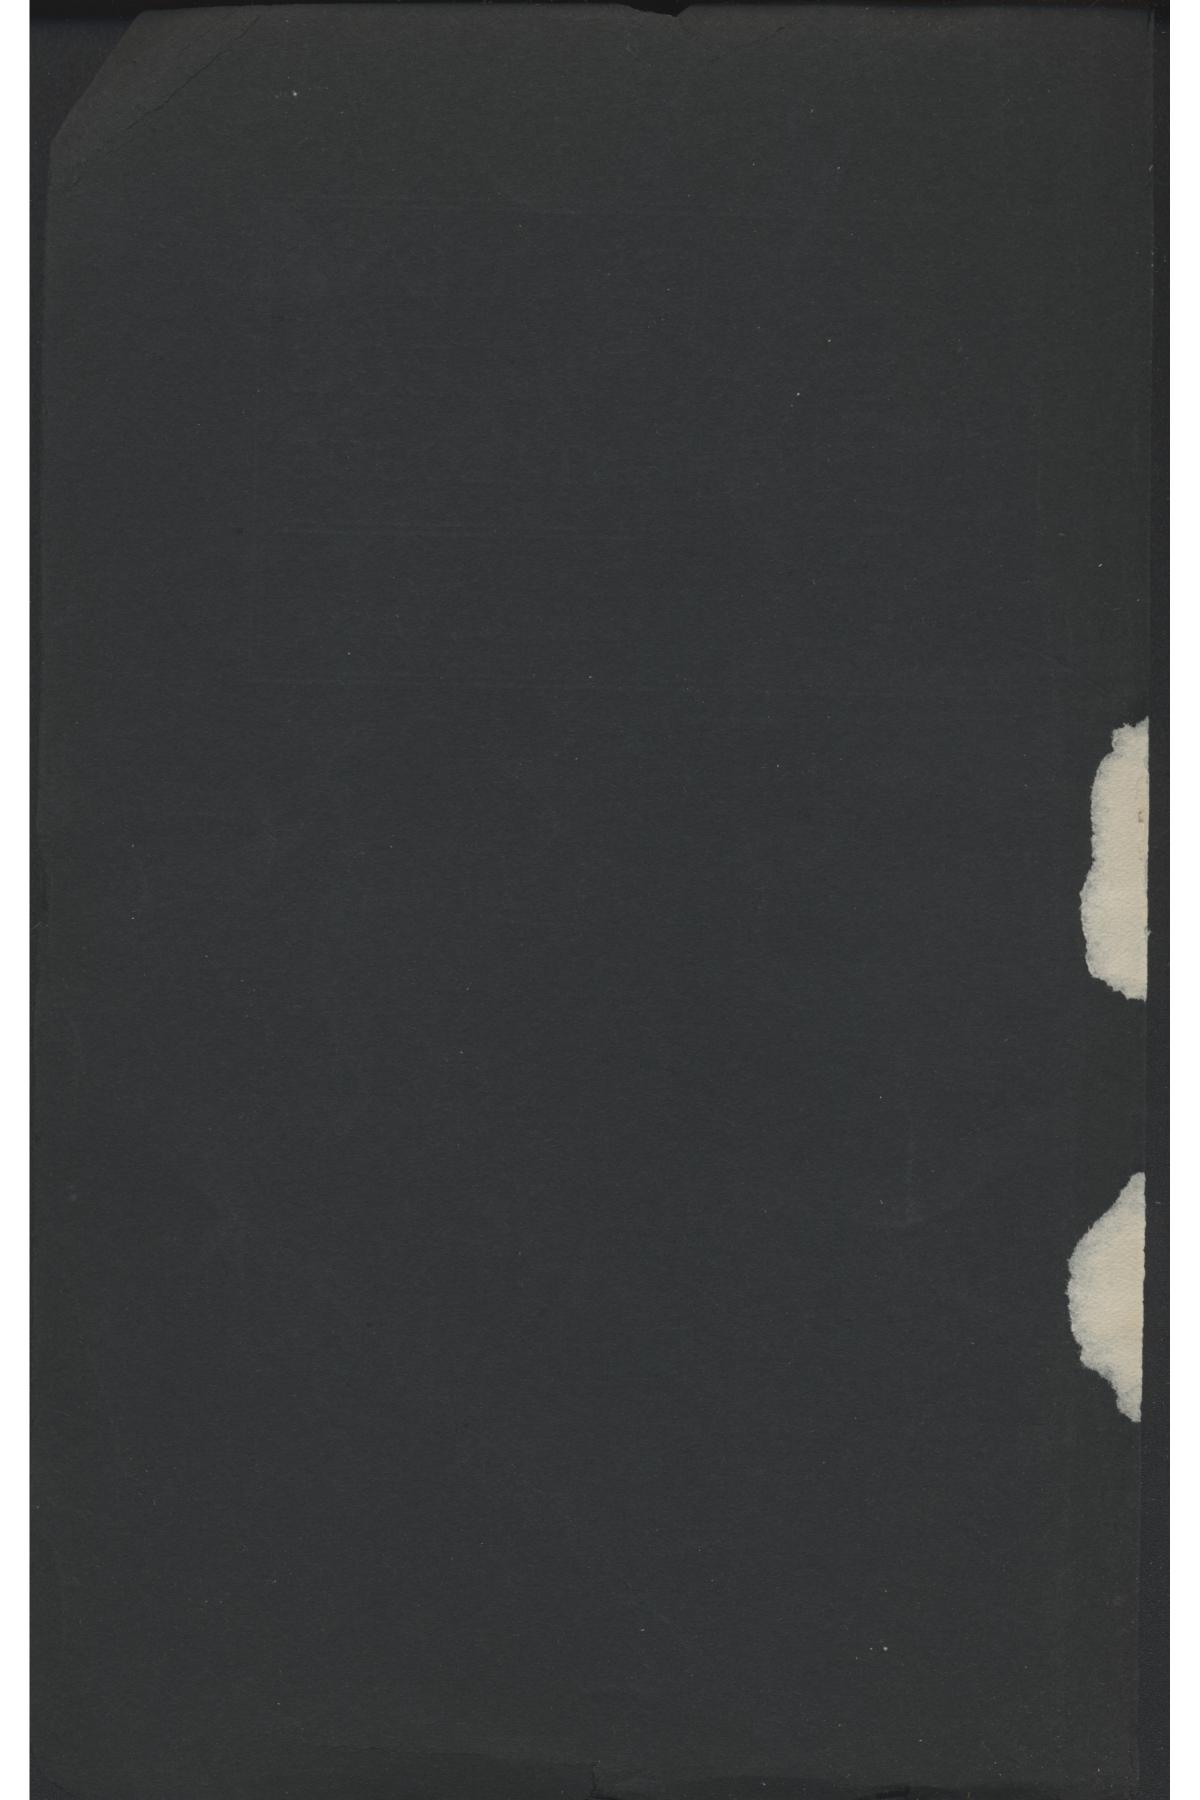 Catalogue of Simmons College, 1907-1908
                                                
                                                    Front Inside
                                                